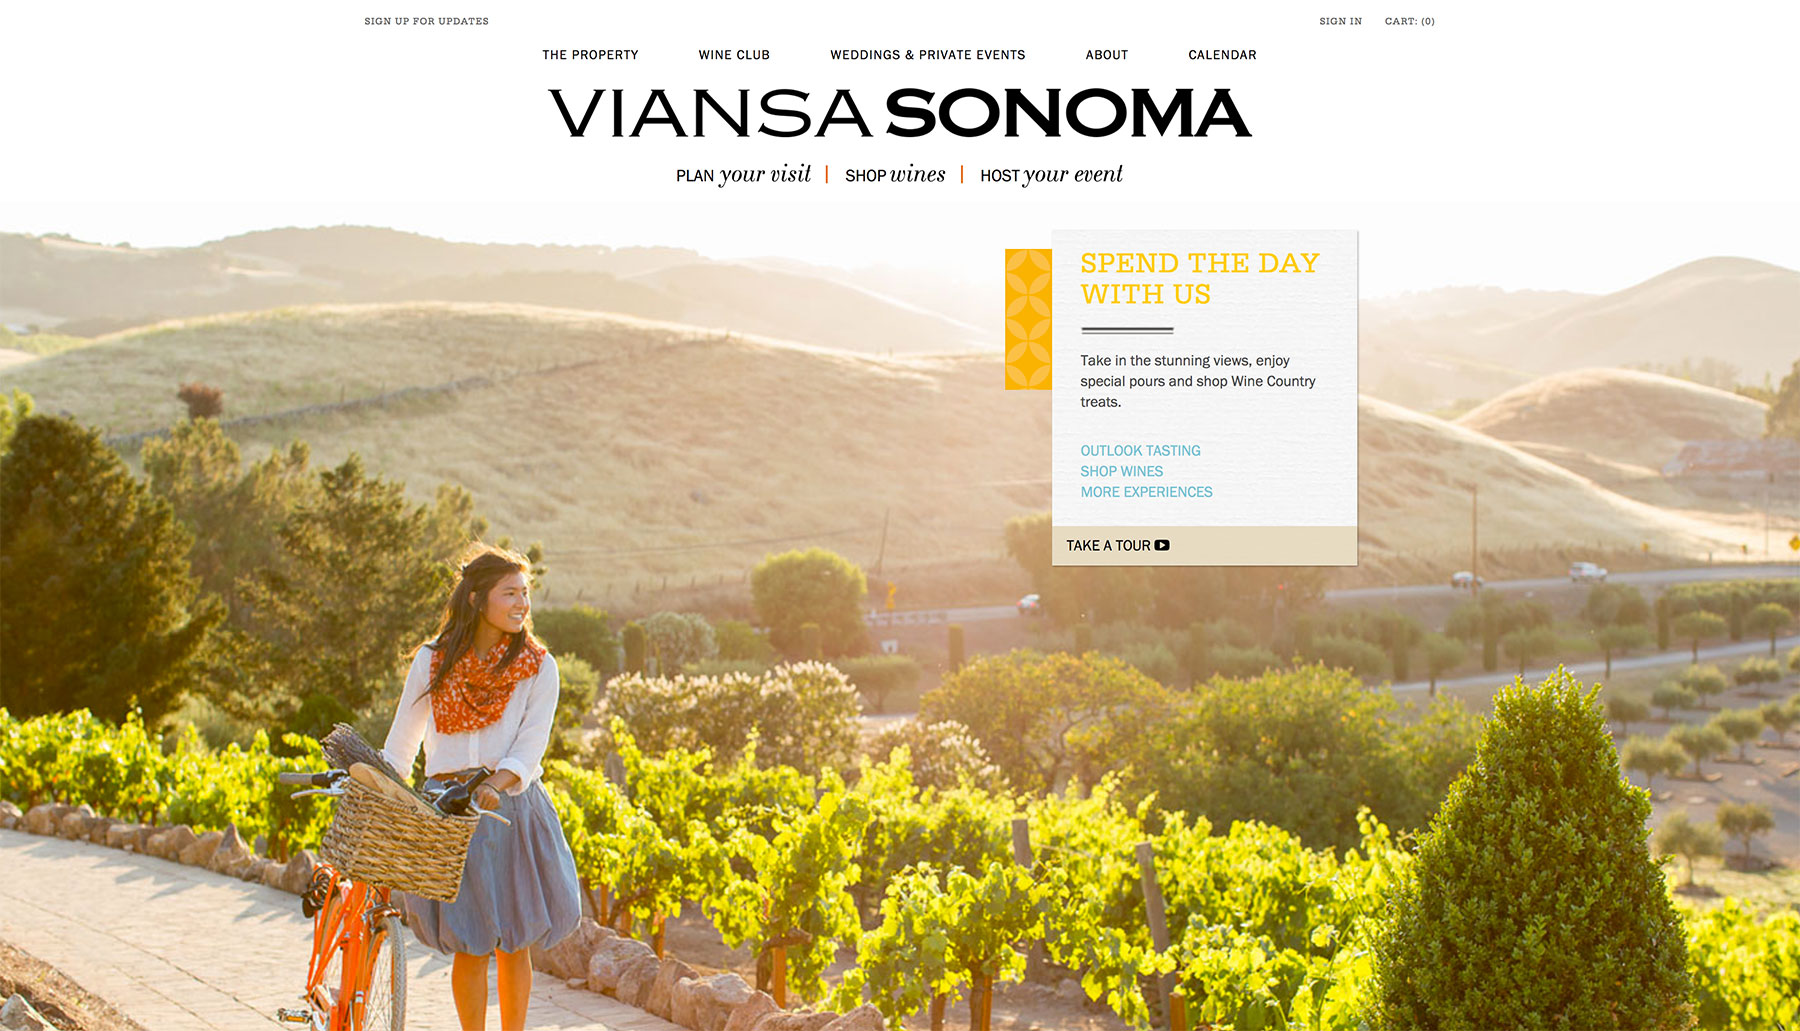 Viansa Sonoma's home page, featuring a young woman at their location.